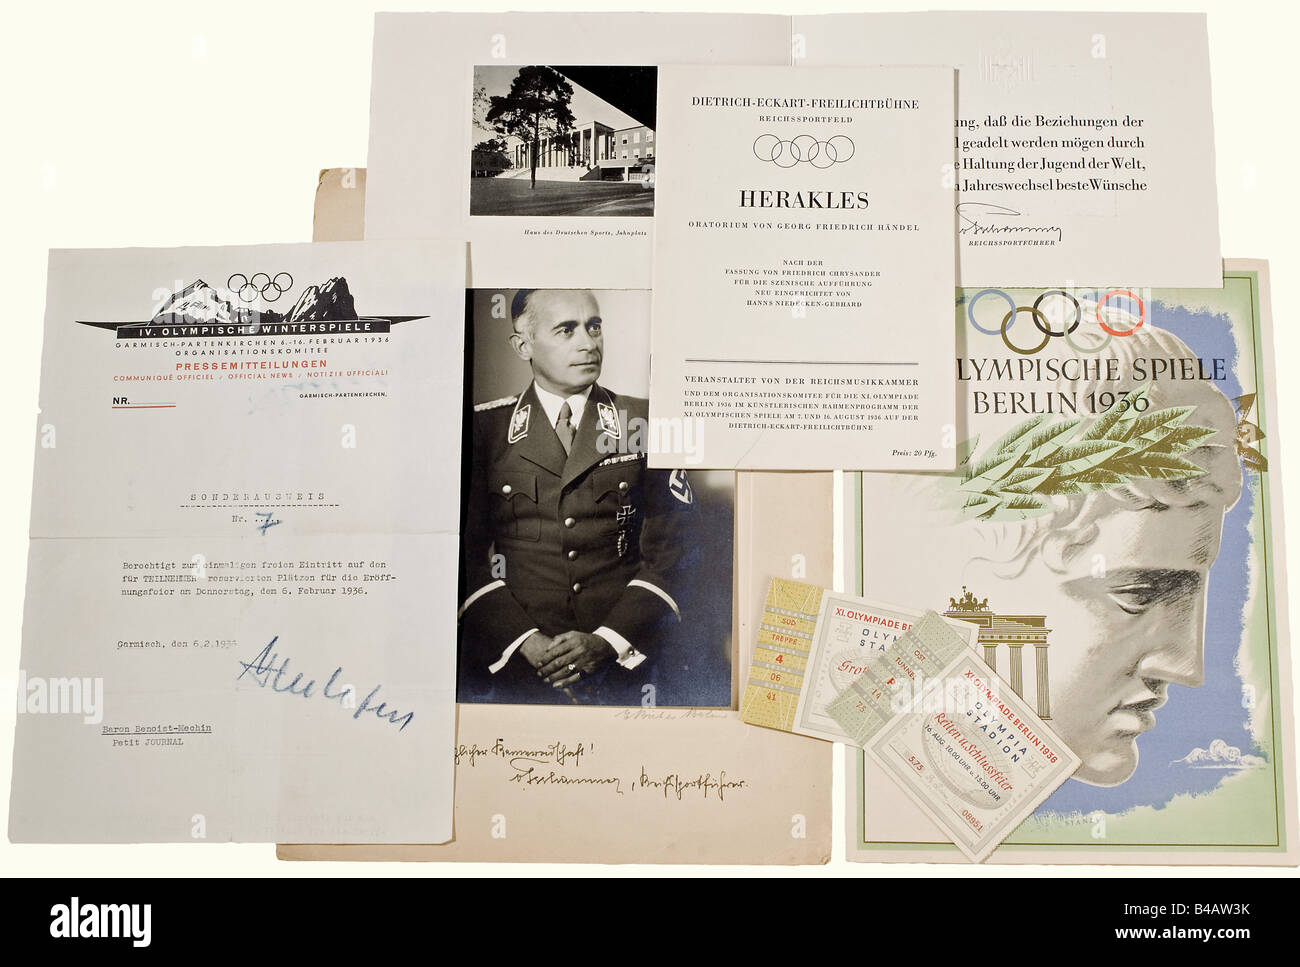 Jacques Benoist-Méchin, Olympic Games 1936., Colour telegram, special ID  card for the Winter Games 1936 in Garmisch-Partenkirchen, photographs of  Jacques Benoist-Méchin at the Winter Games, invitations, name card of von  Tschammer and